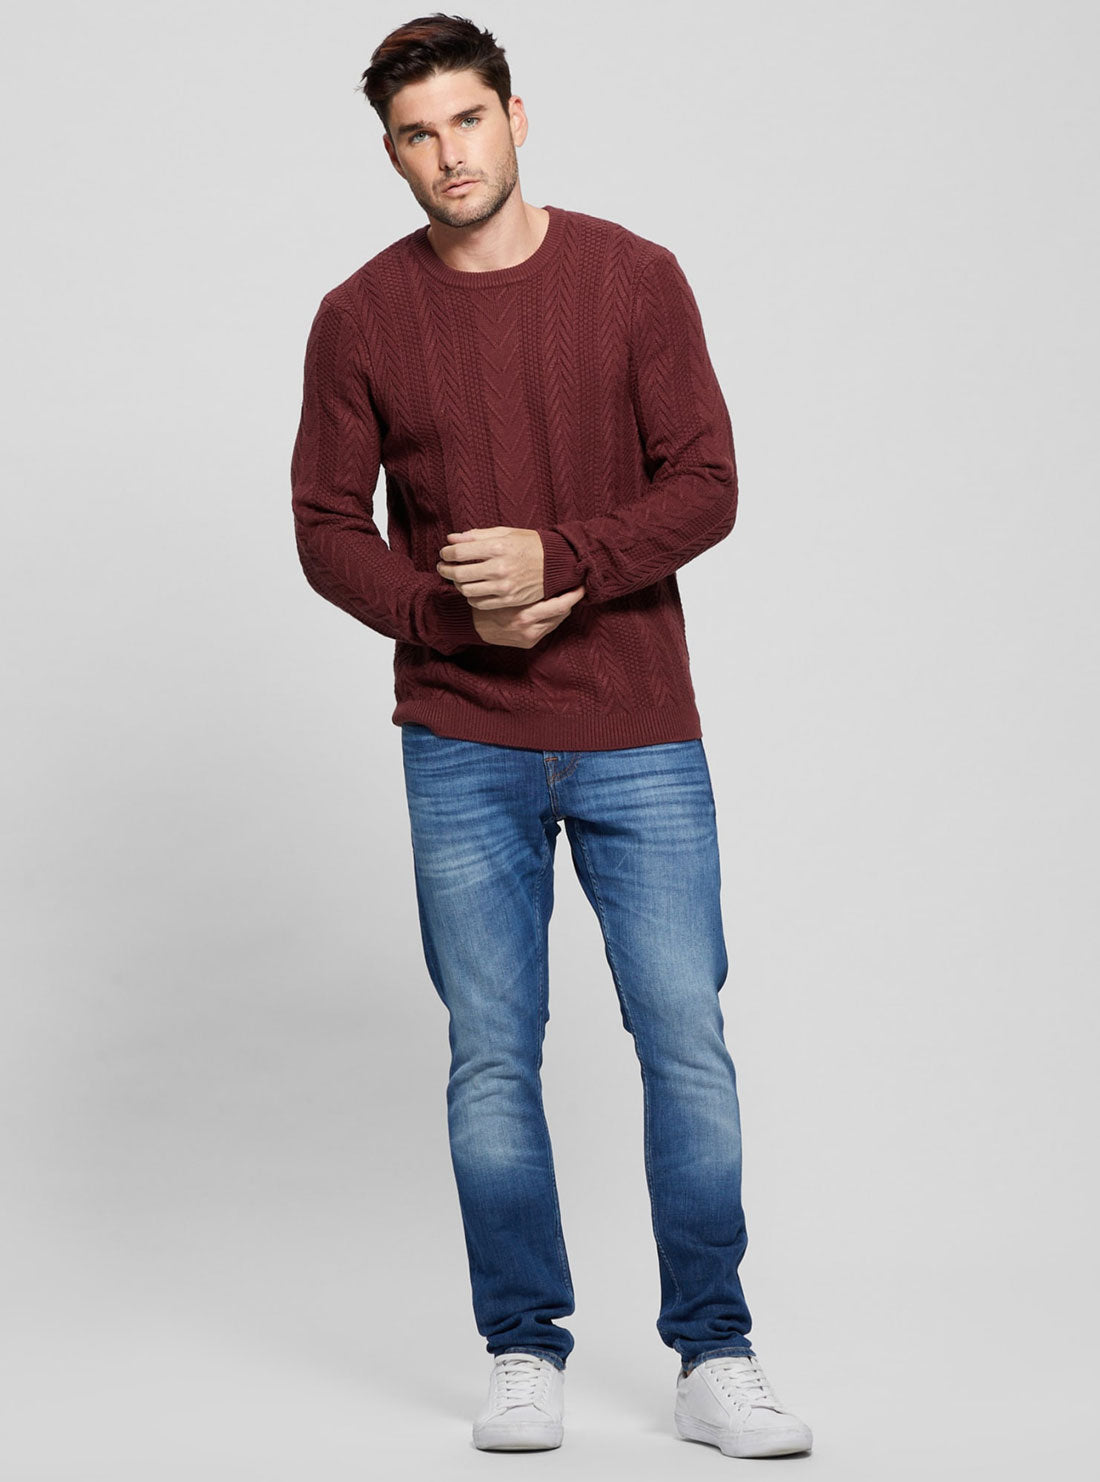 Maroon Red Cable Ethan Knit Top | GUESS men's Apparel | full view